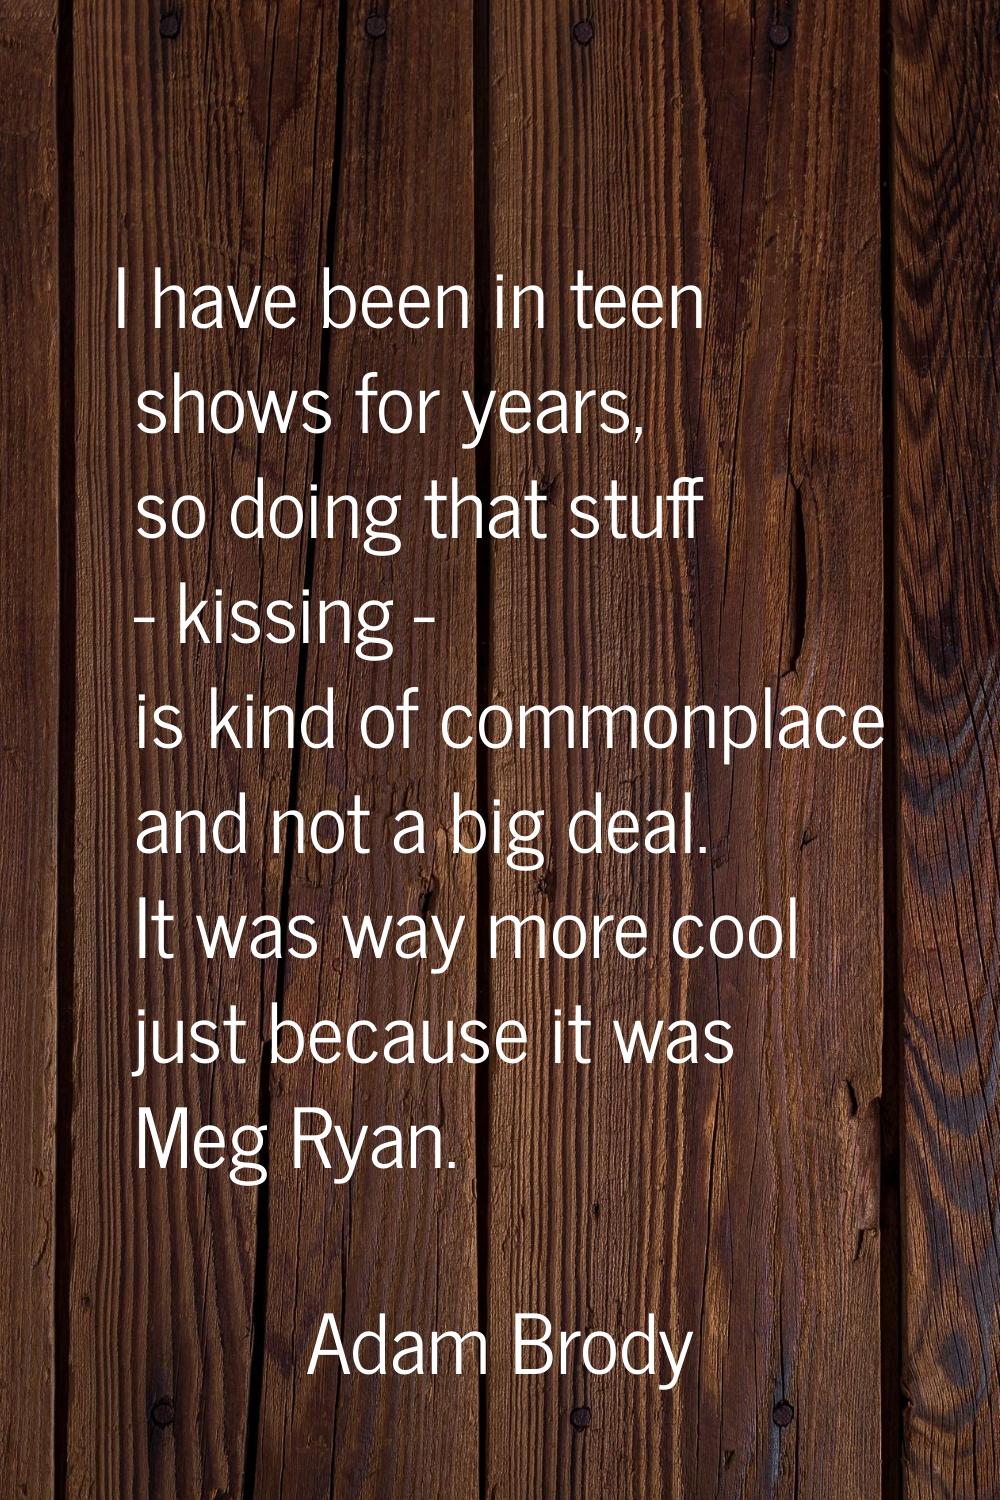 I have been in teen shows for years, so doing that stuff - kissing - is kind of commonplace and not